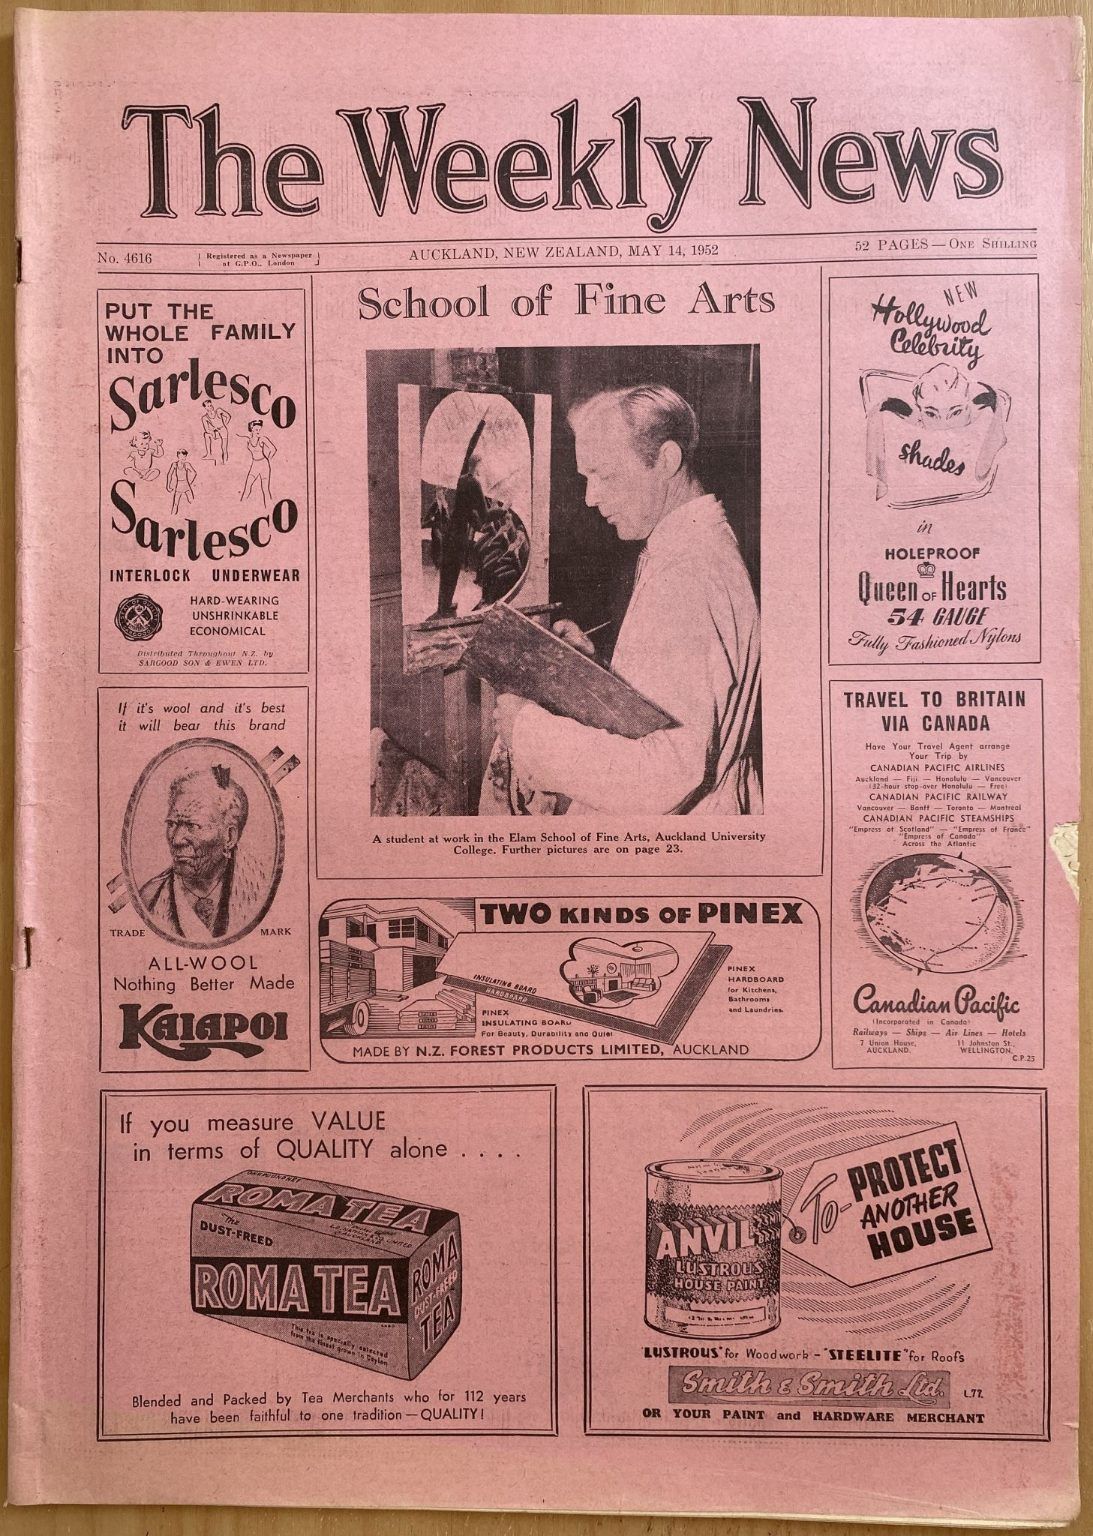 OLD NEWSPAPER: The Weekly News - No. 4616, 14 May 1952